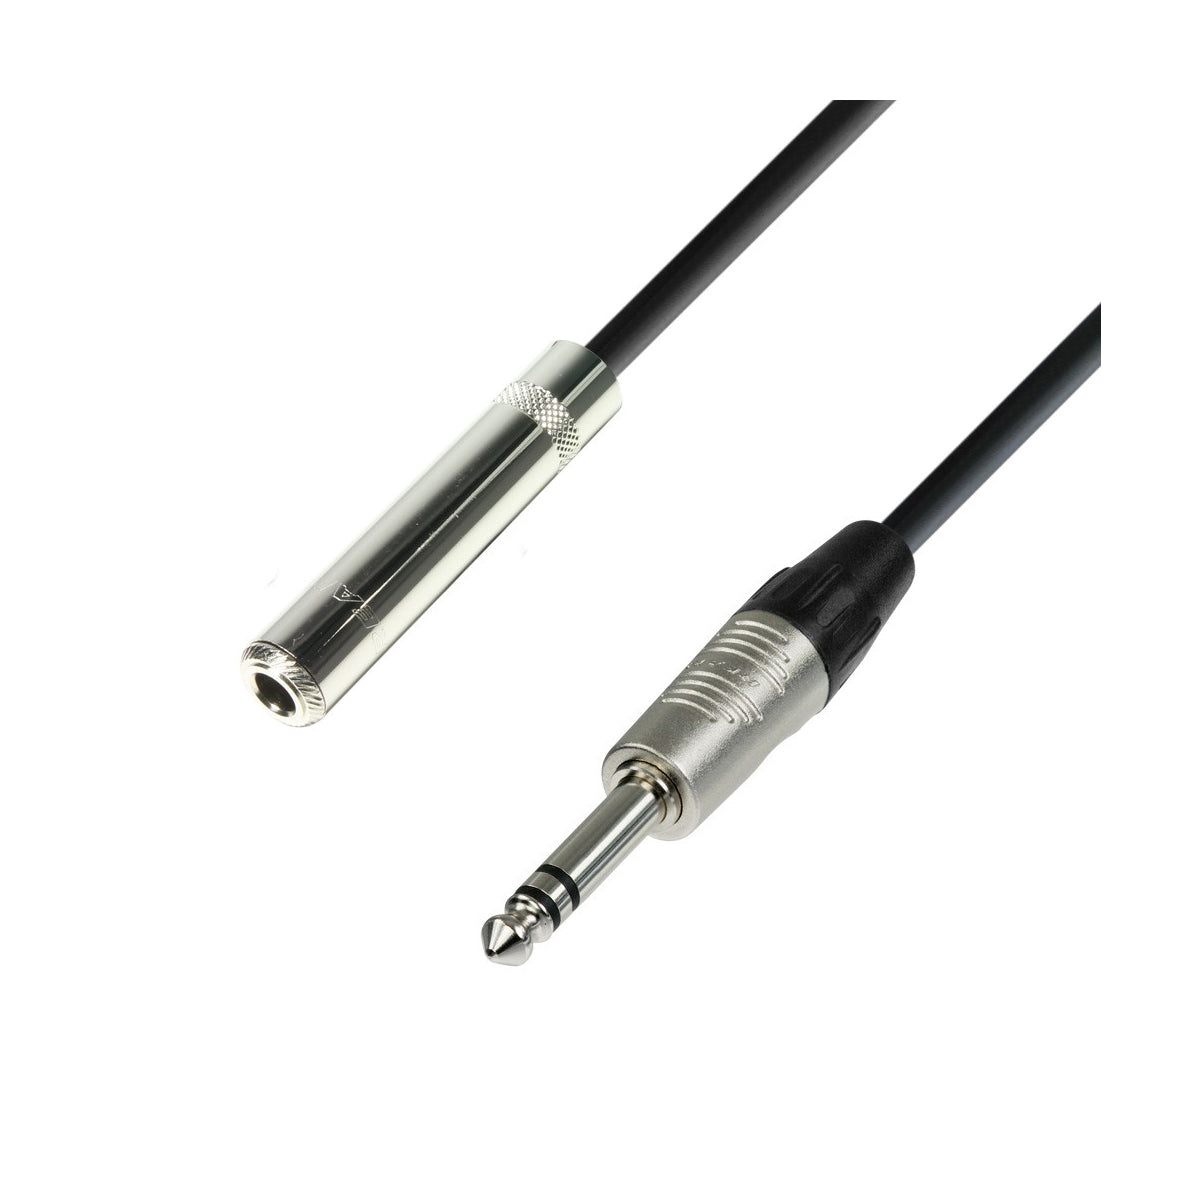 Adam Hall Cables K4 BYV 0600 - Headphone Extension 3.5mm Jack stereo to 6.3mm Jack stereo 6m